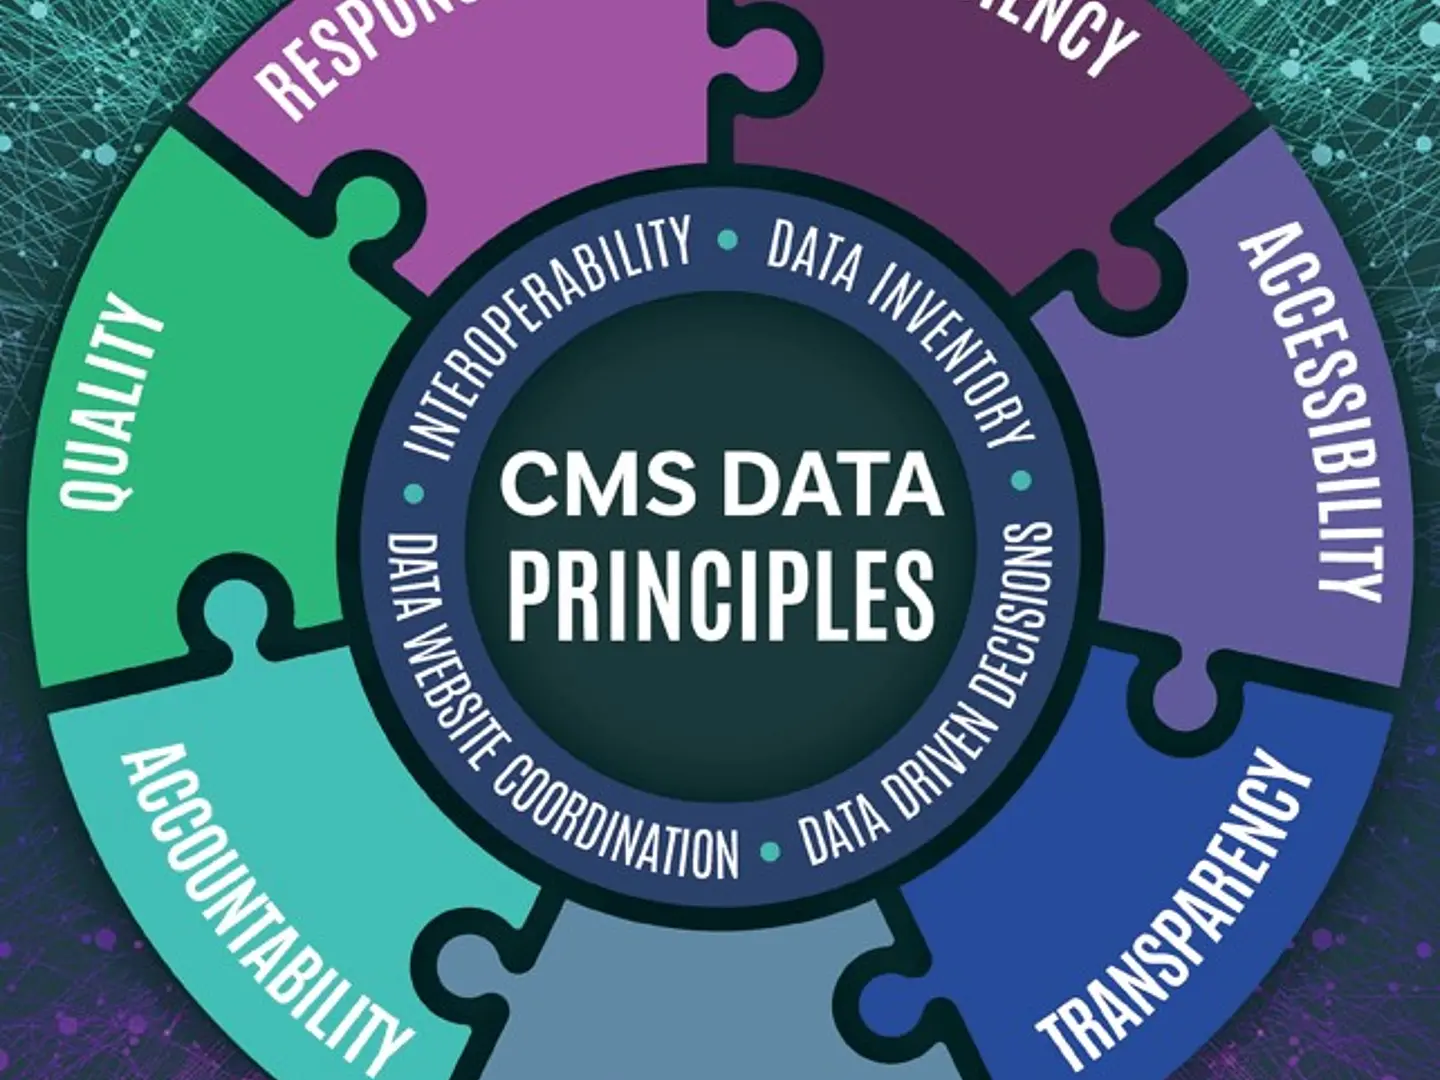 CMS Data Principles: Responsibility, Efficiency, Accessibility, Transparency, Accountability, Quality